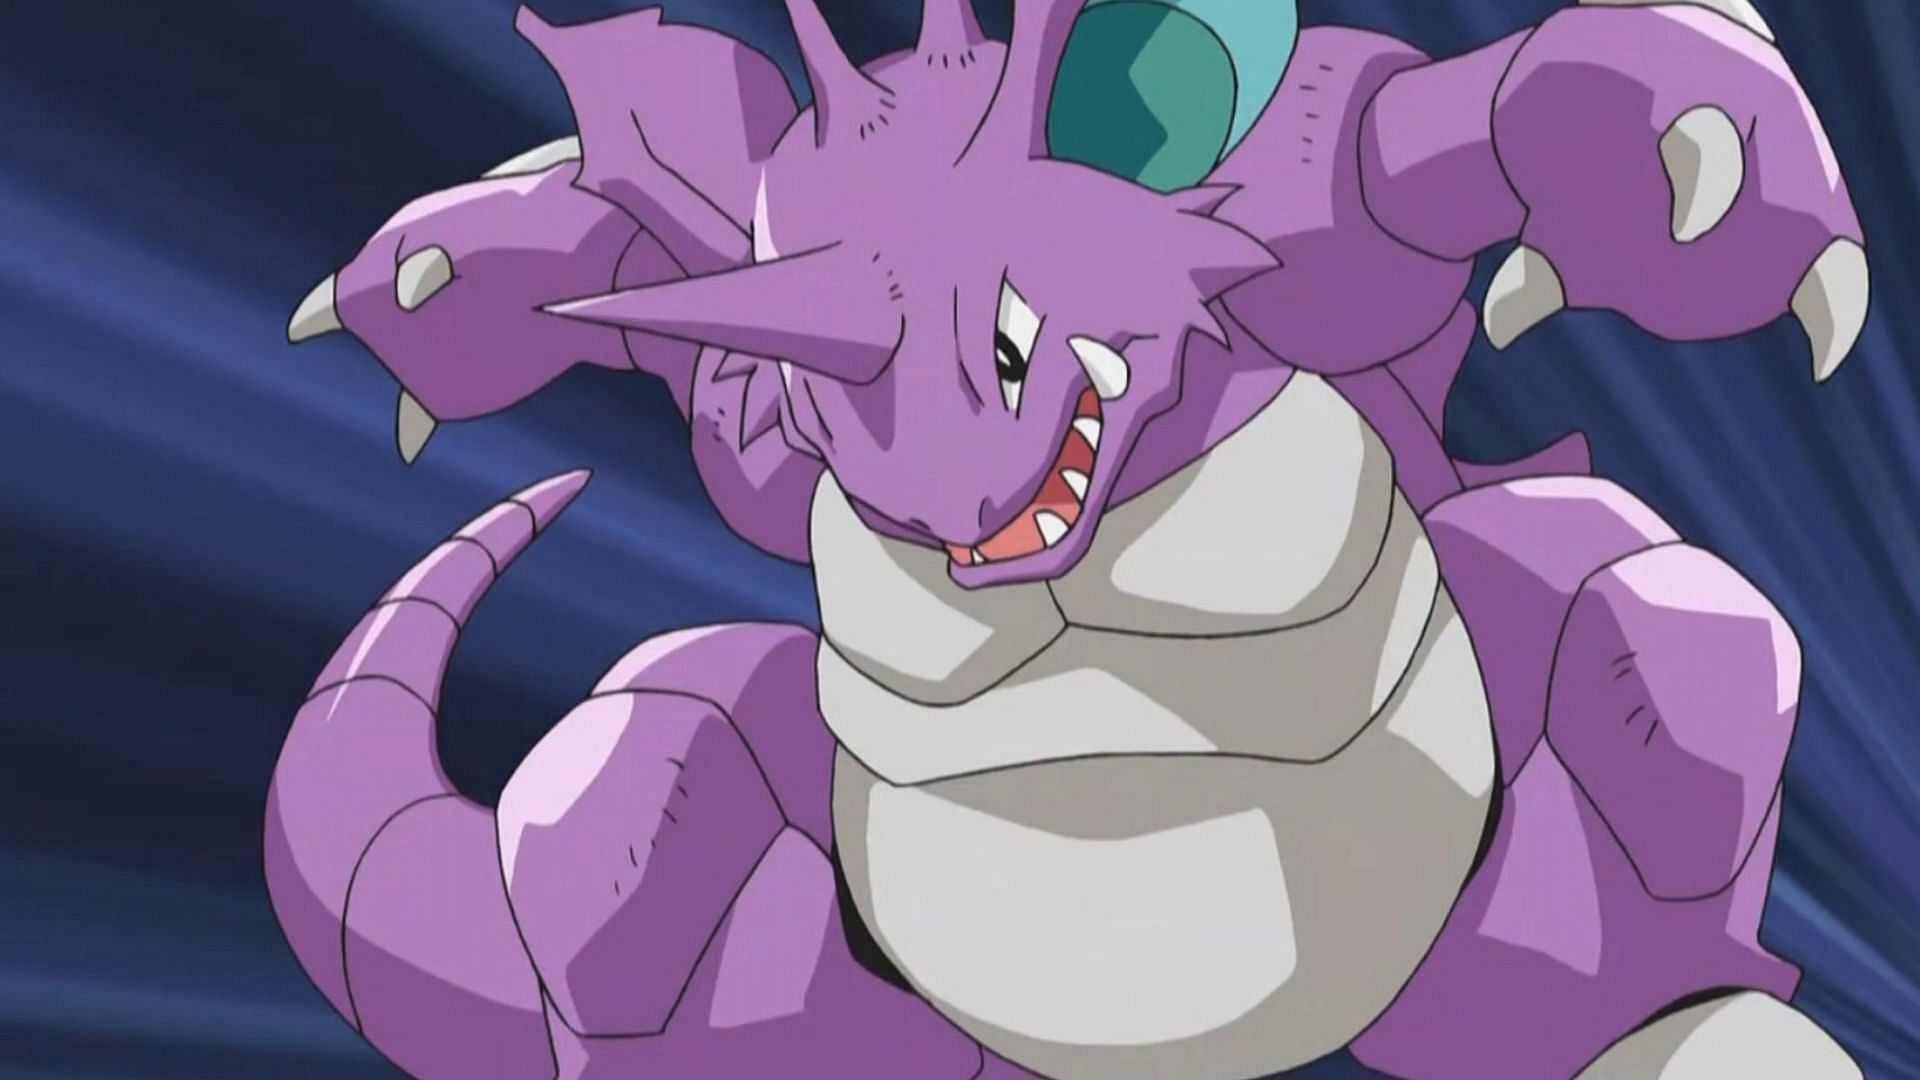 Nidoking as he appears in the anime (Image via The Pokemon Company)